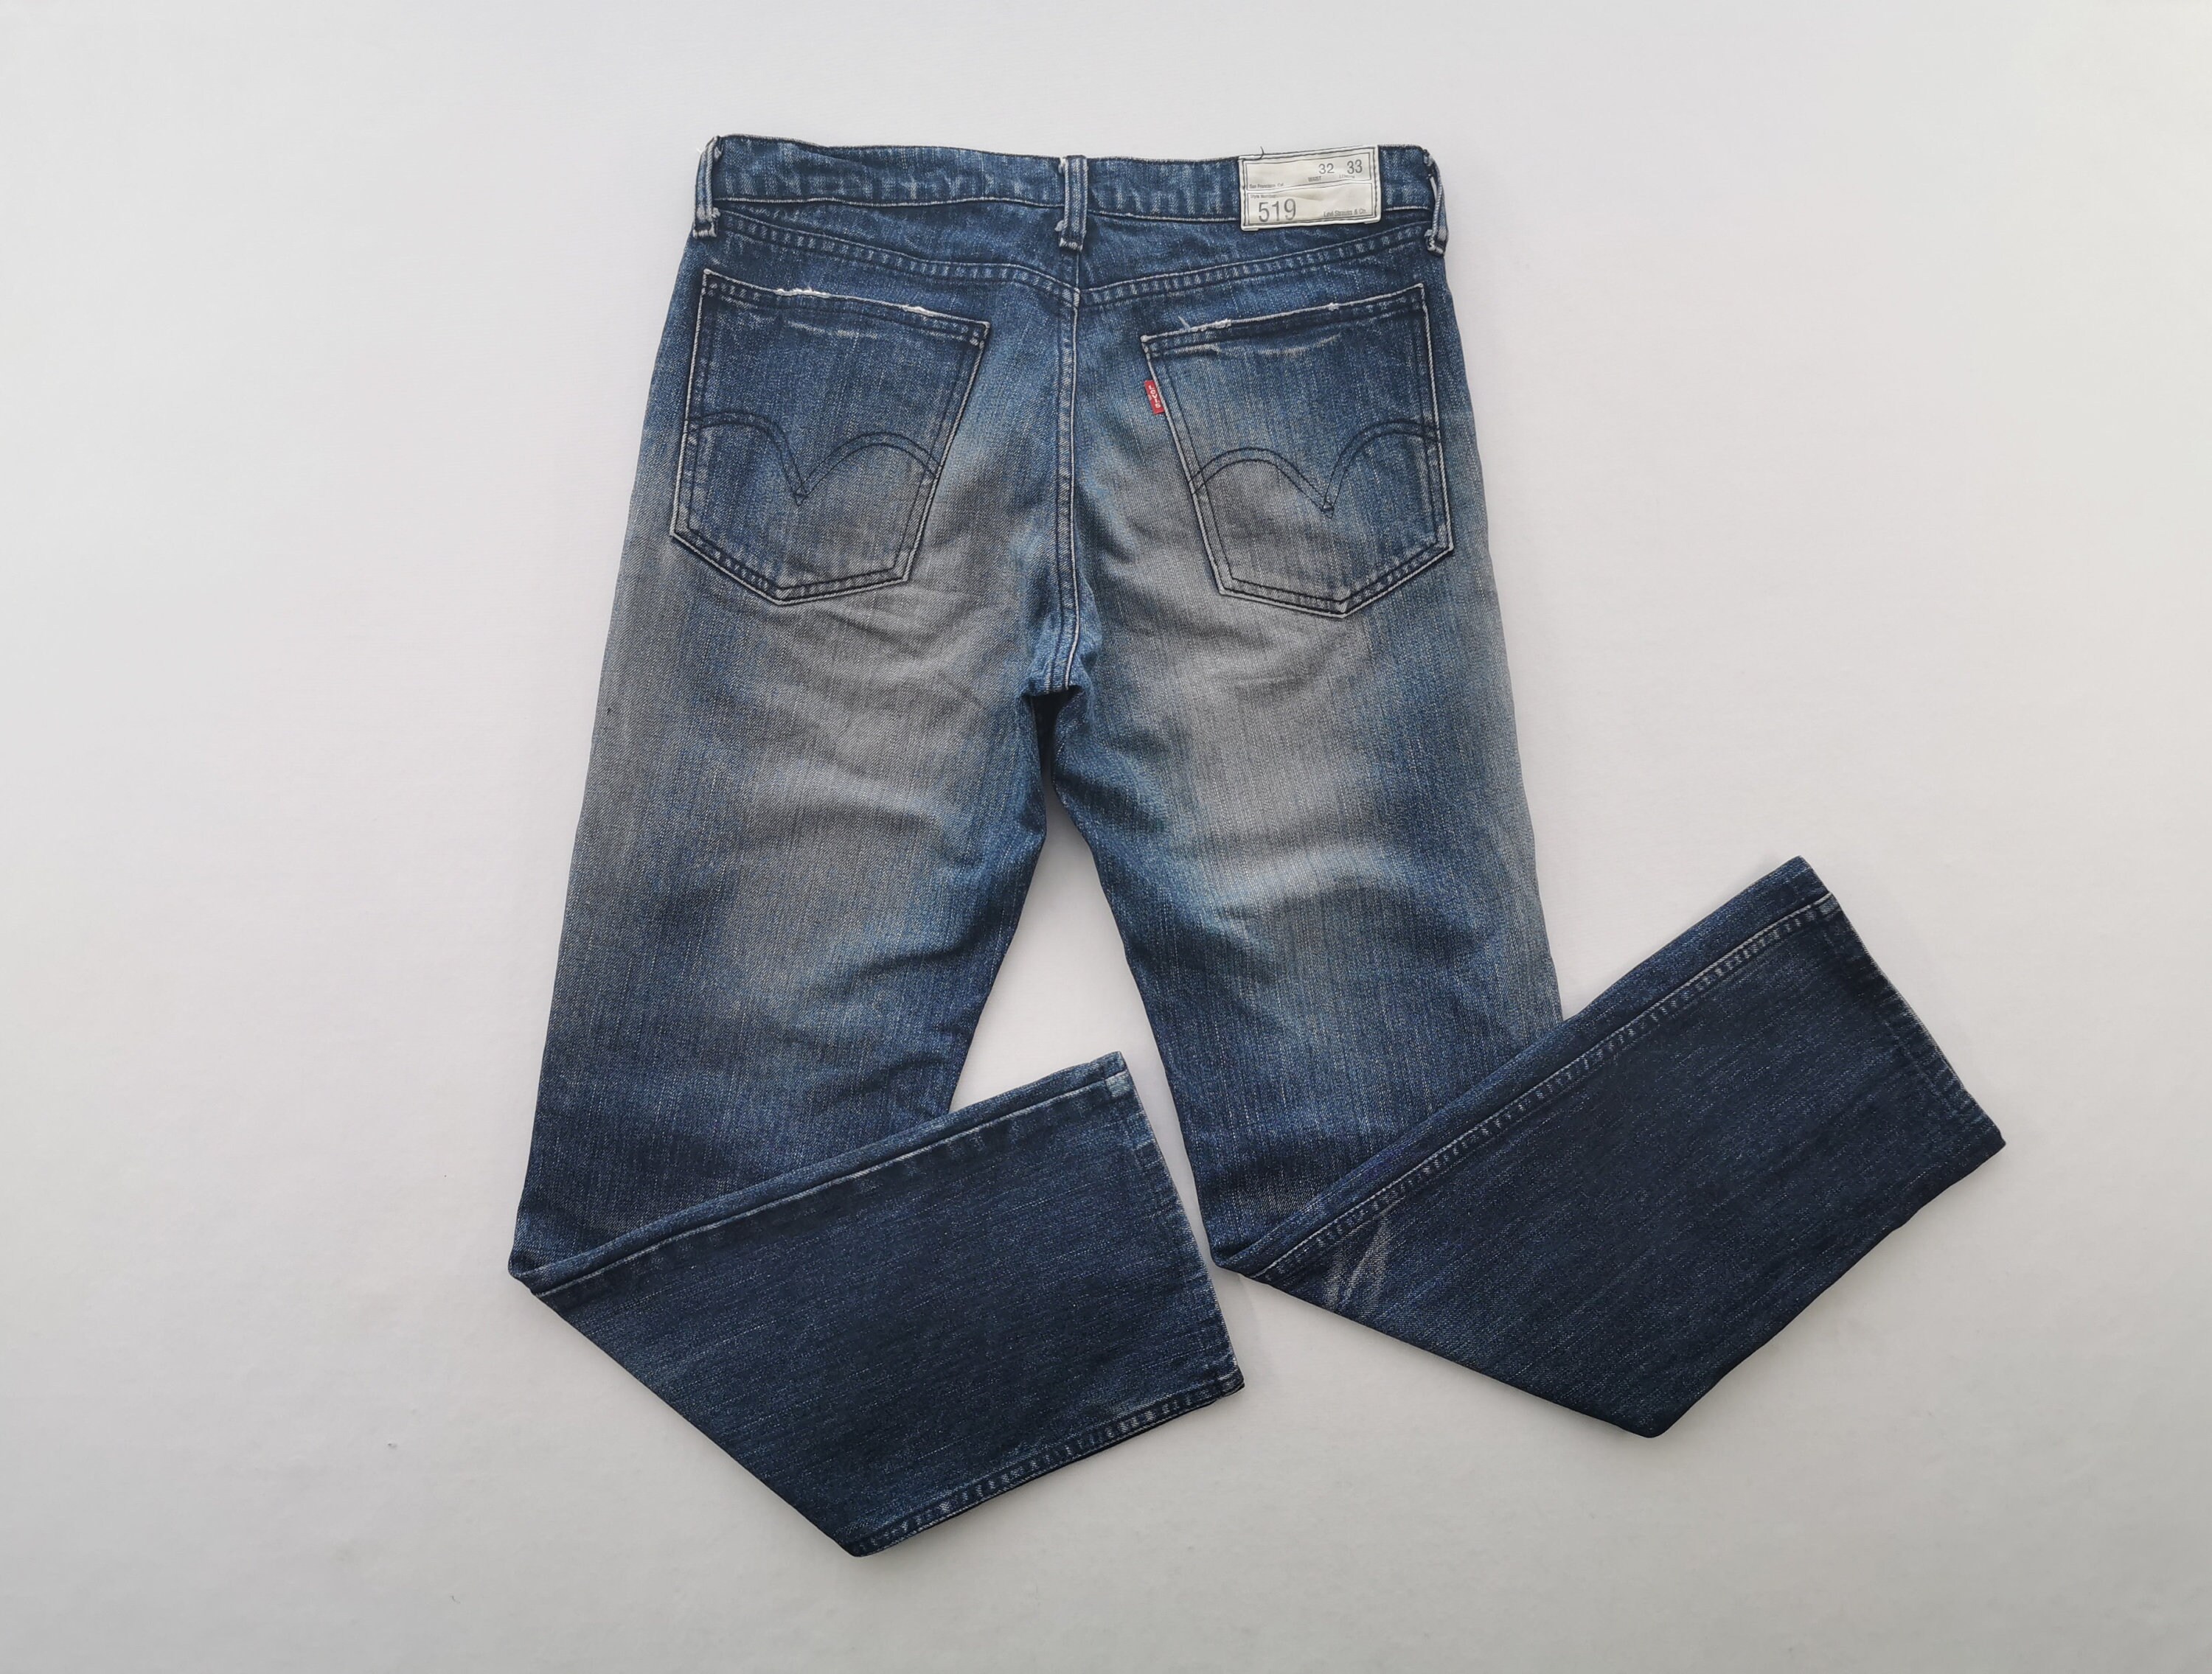 519 Jeans Distressed Size 32 Levis 519 Made - Etsy